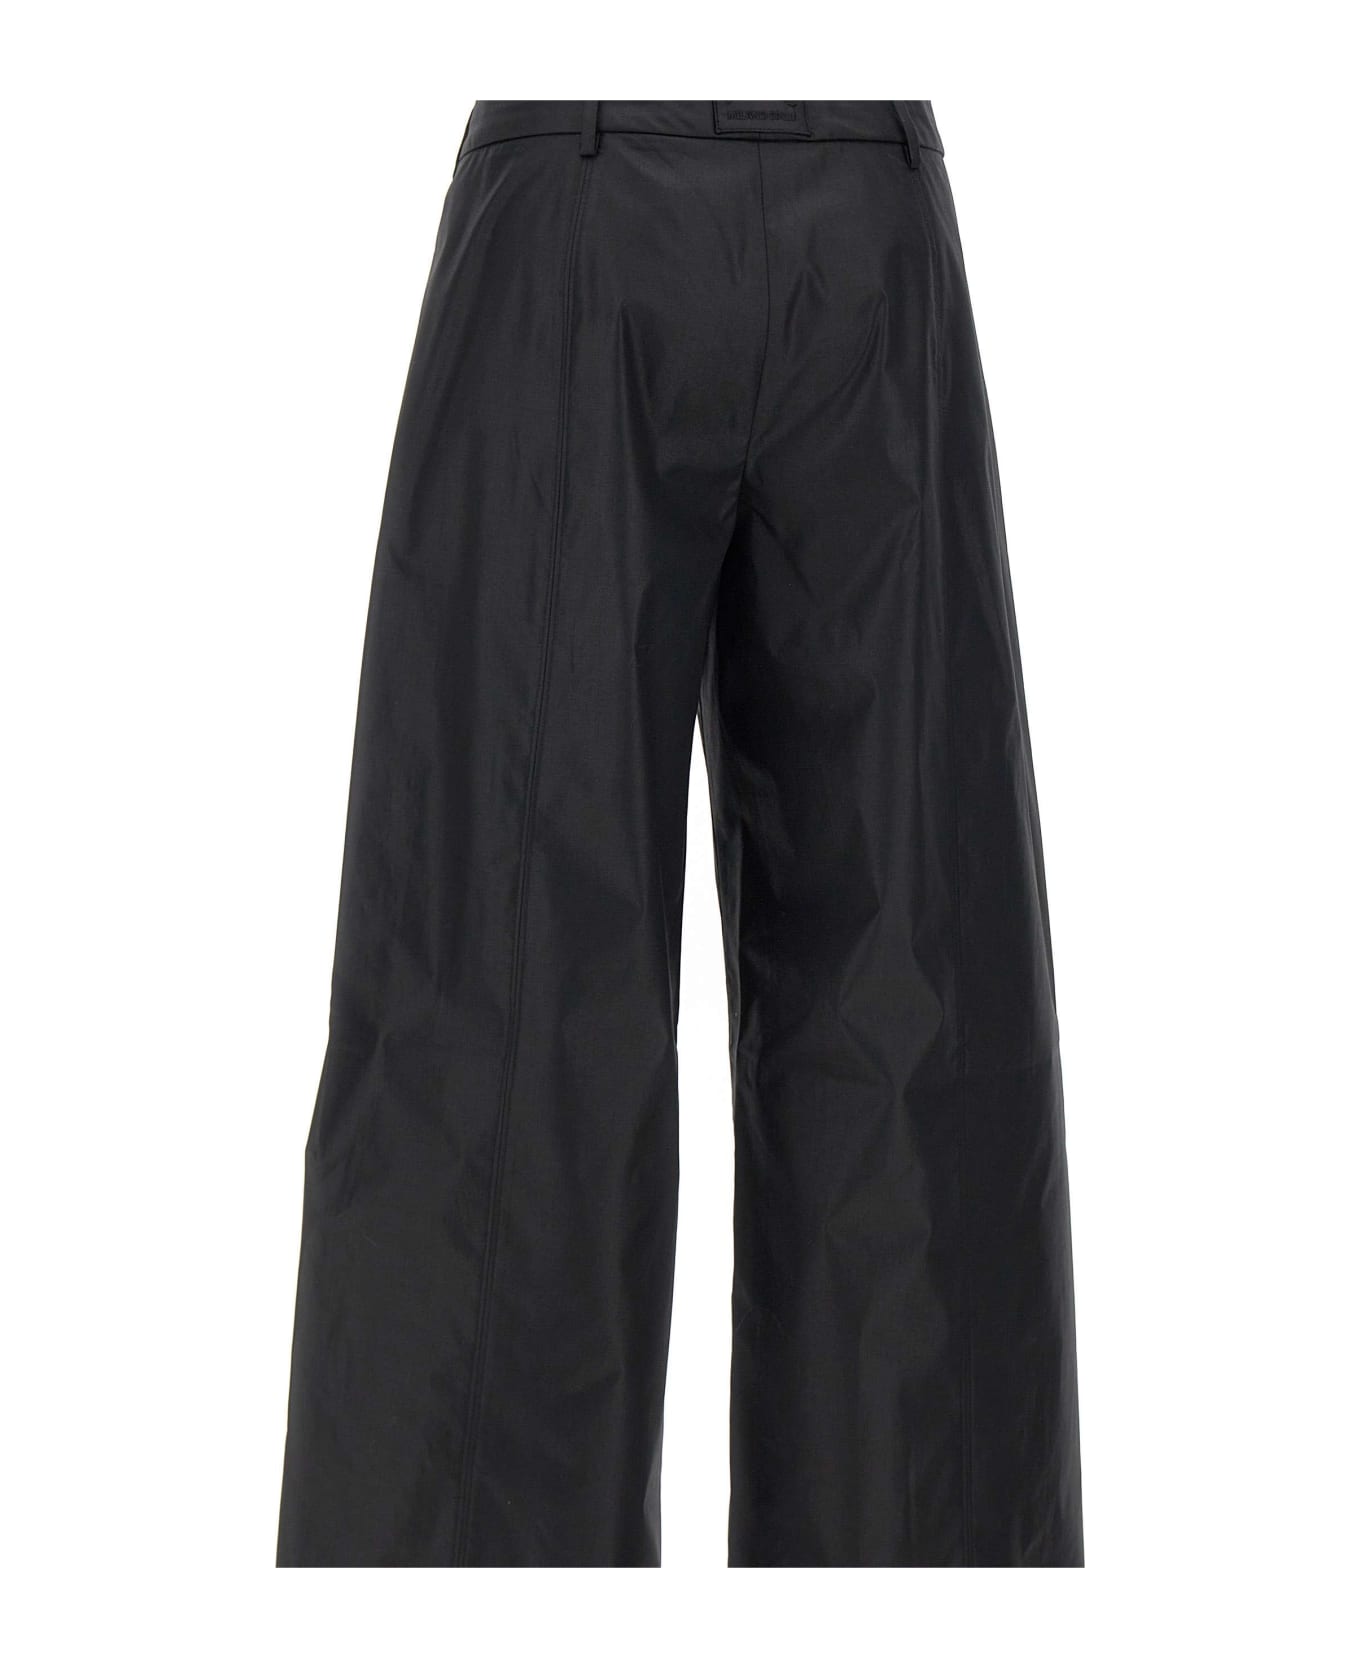 Iceberg Cinched Cotton Trousers - BLACK ボトムス